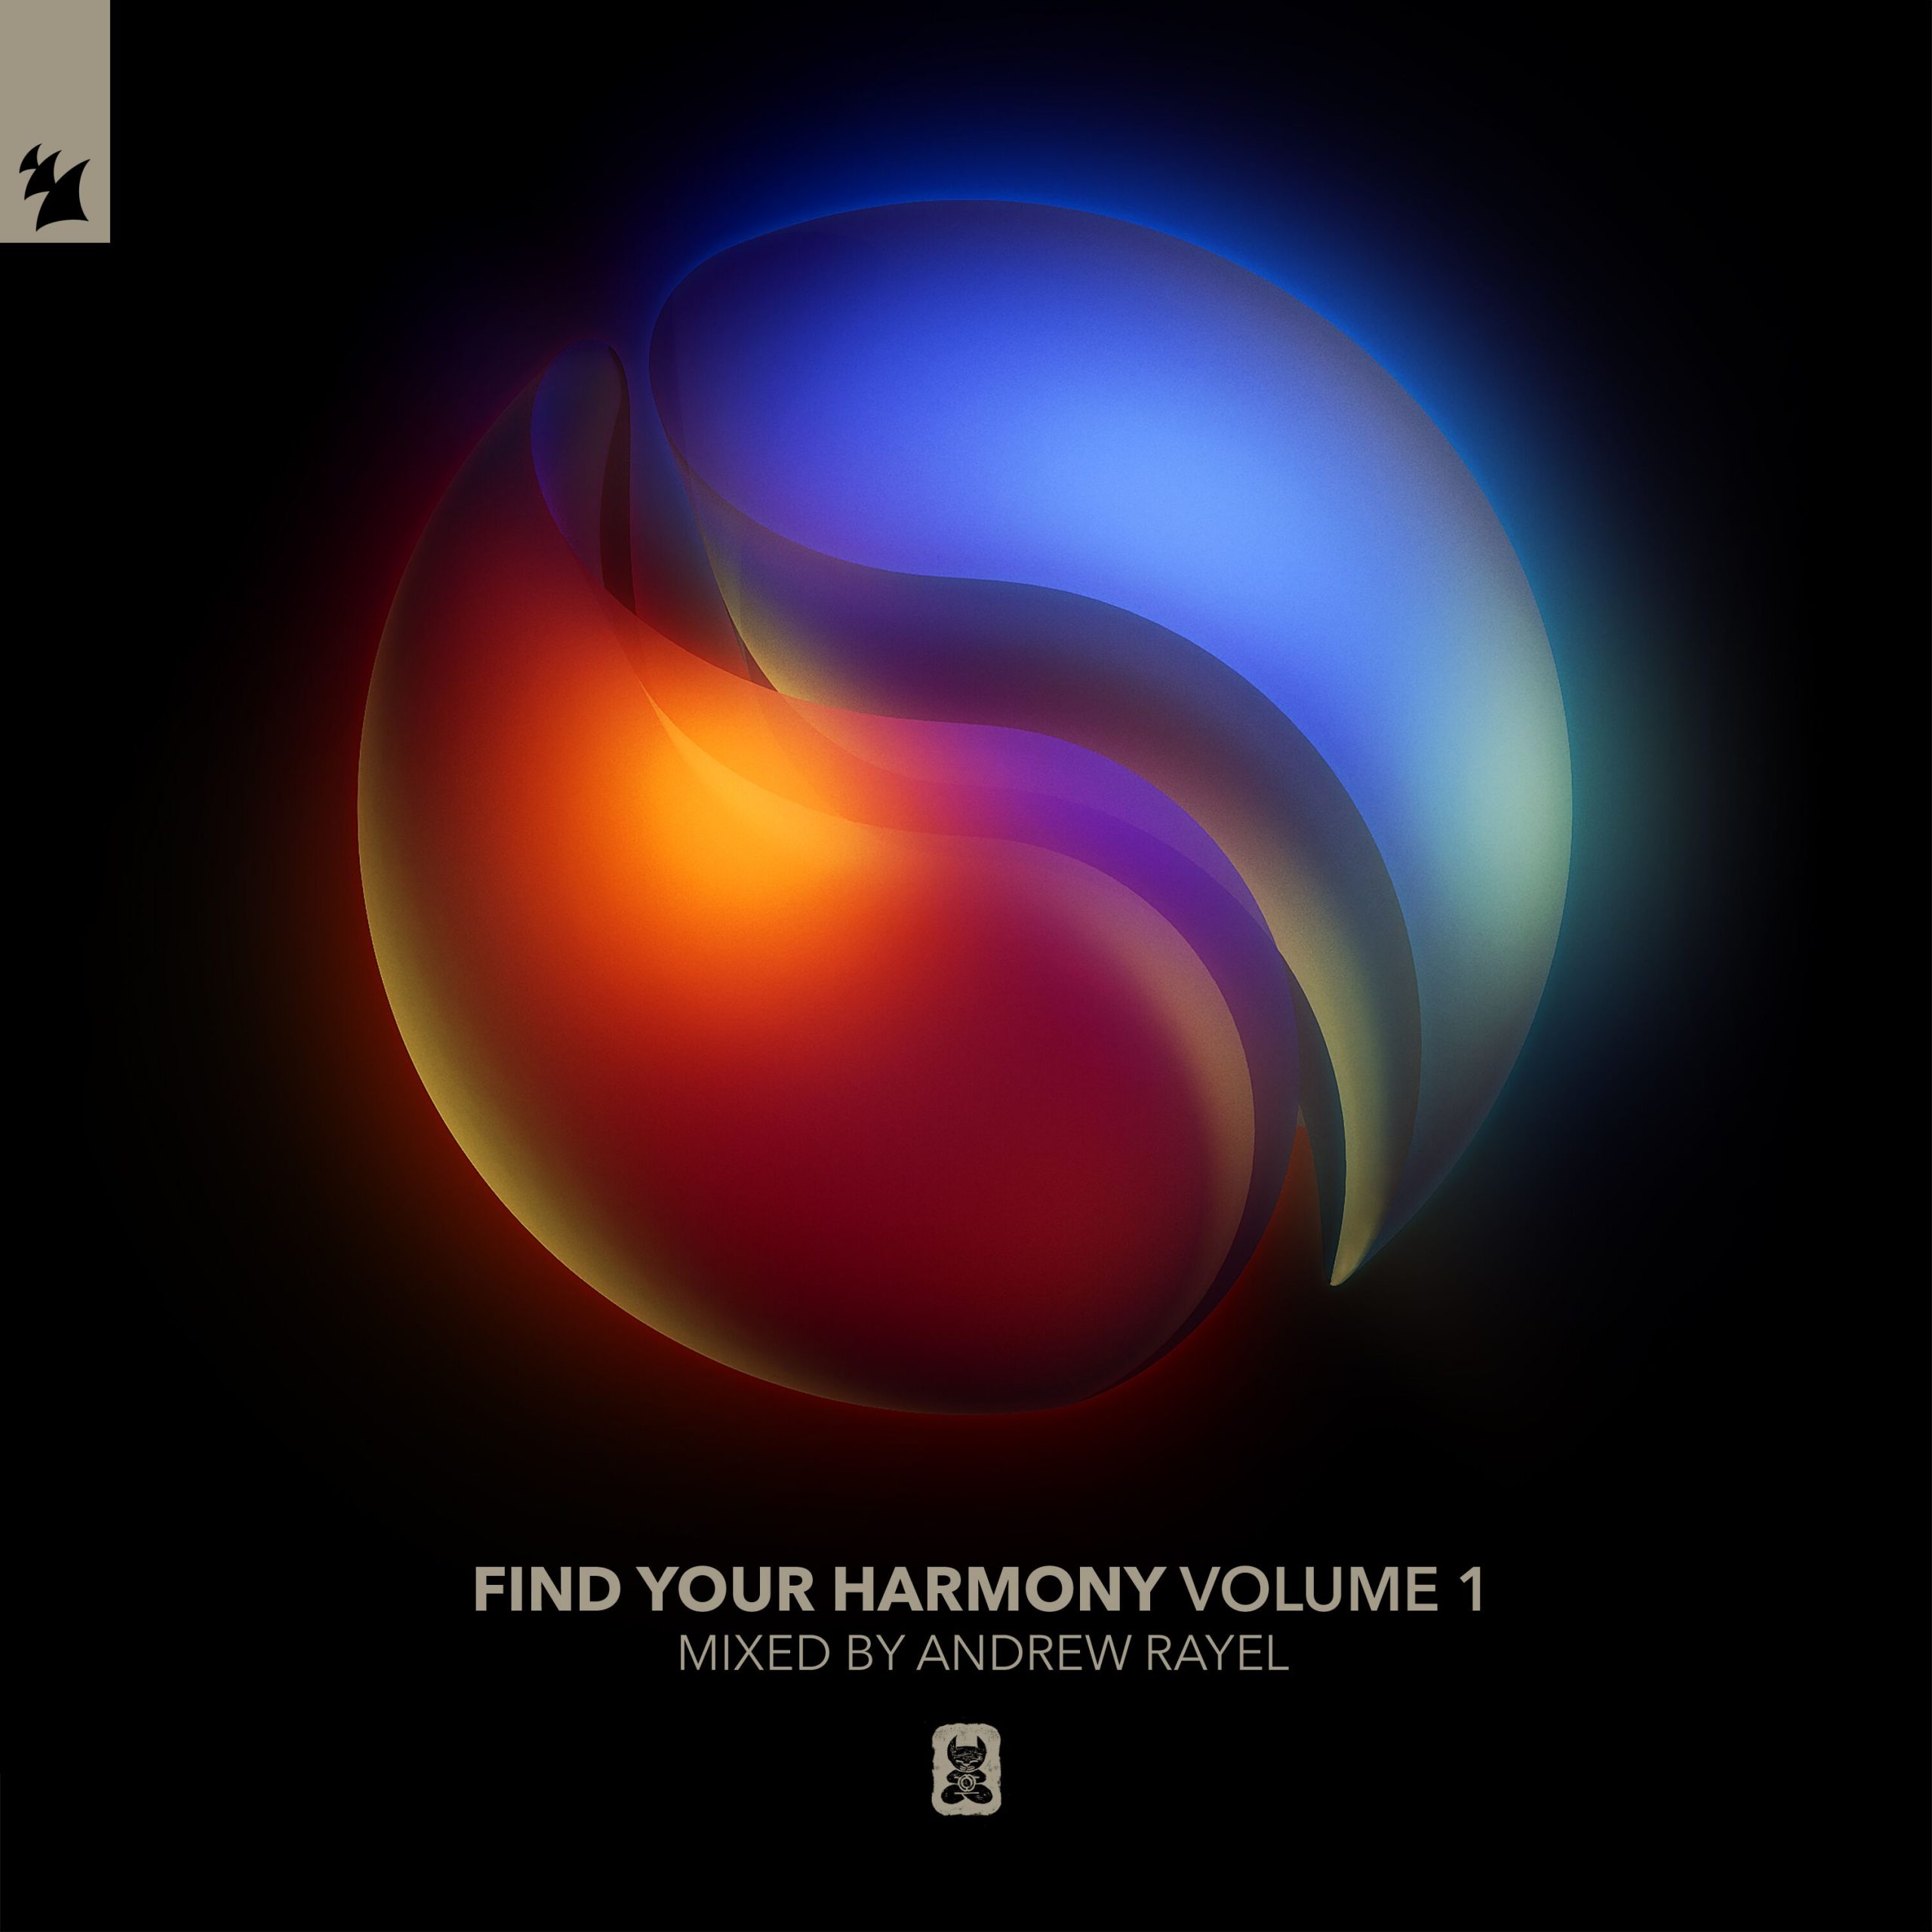 Various Artists presents Find Your Harmony volume 1 mixed by Andrew Rayel on inHarmony